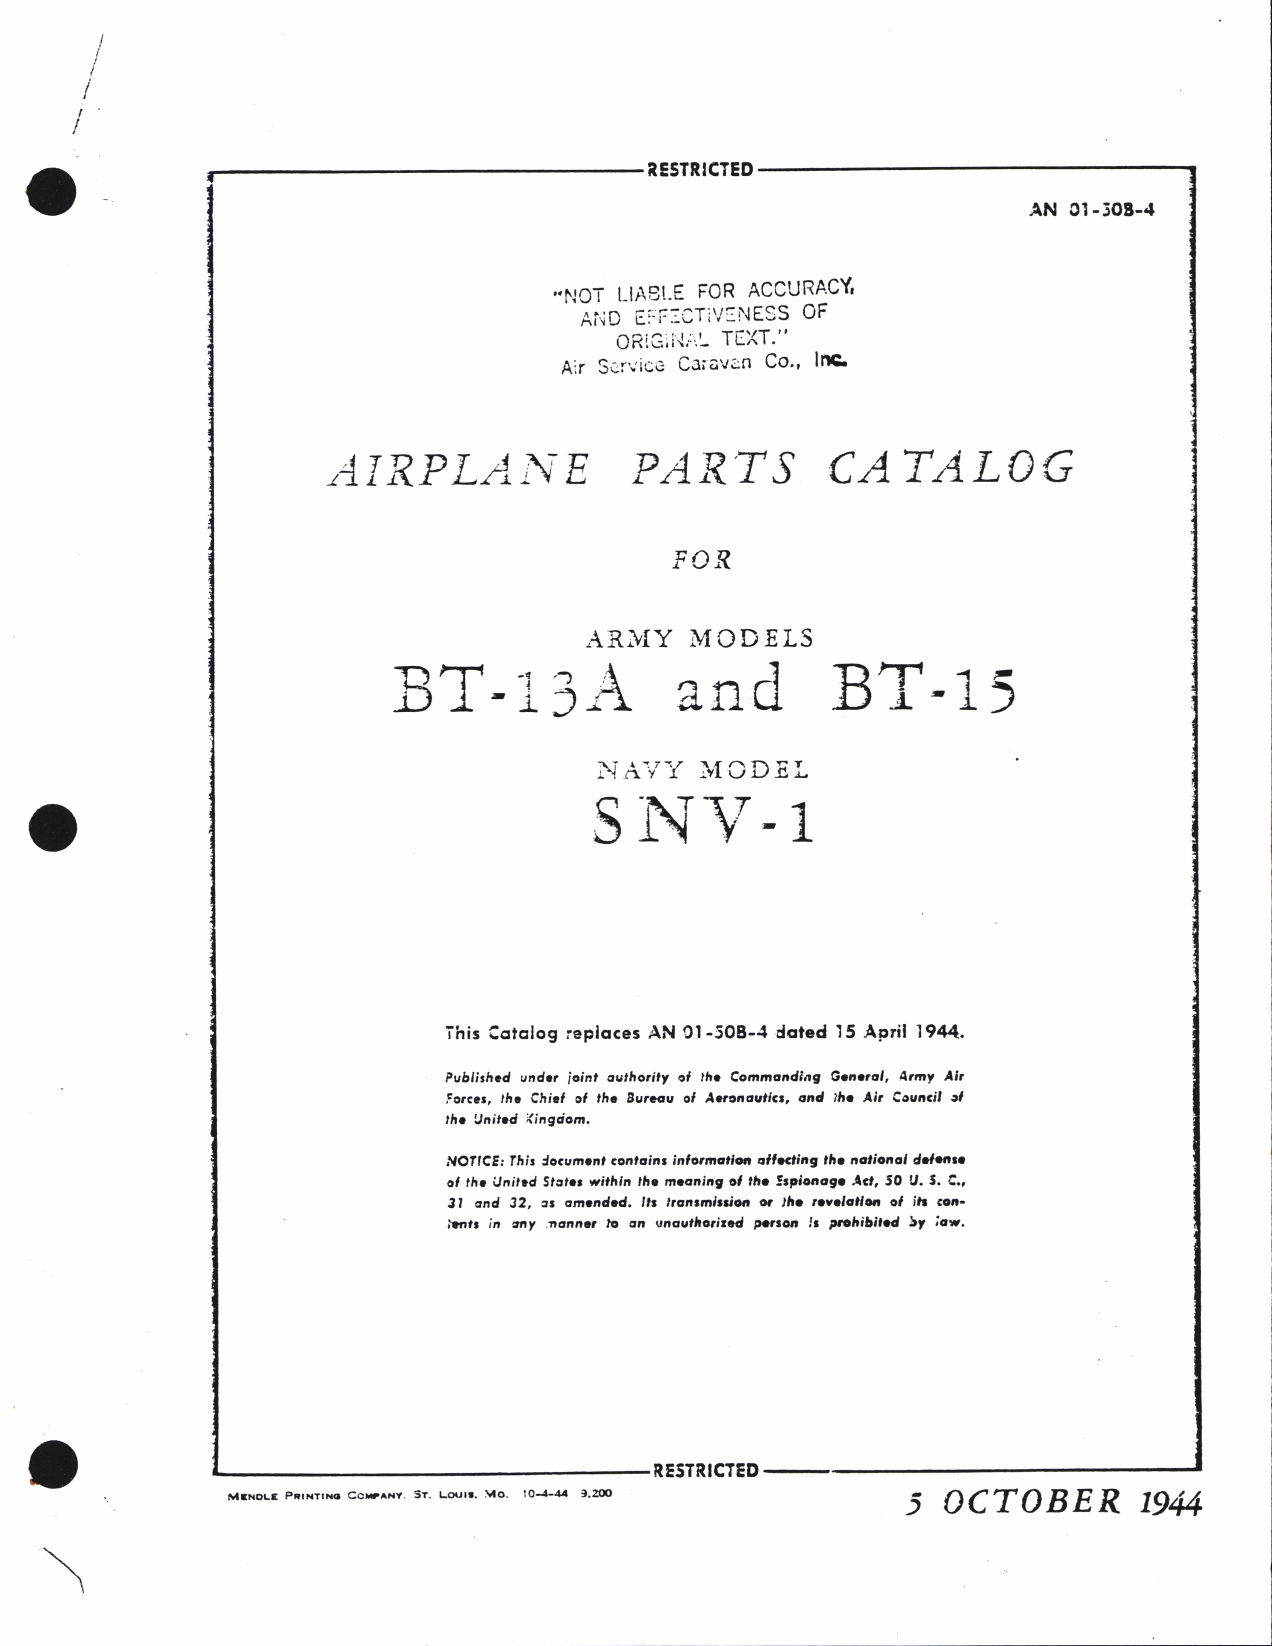 Sample page 1 from AirCorps Library document: Parts Catalog for BT-13A, BT-15, and SNV-1 Models